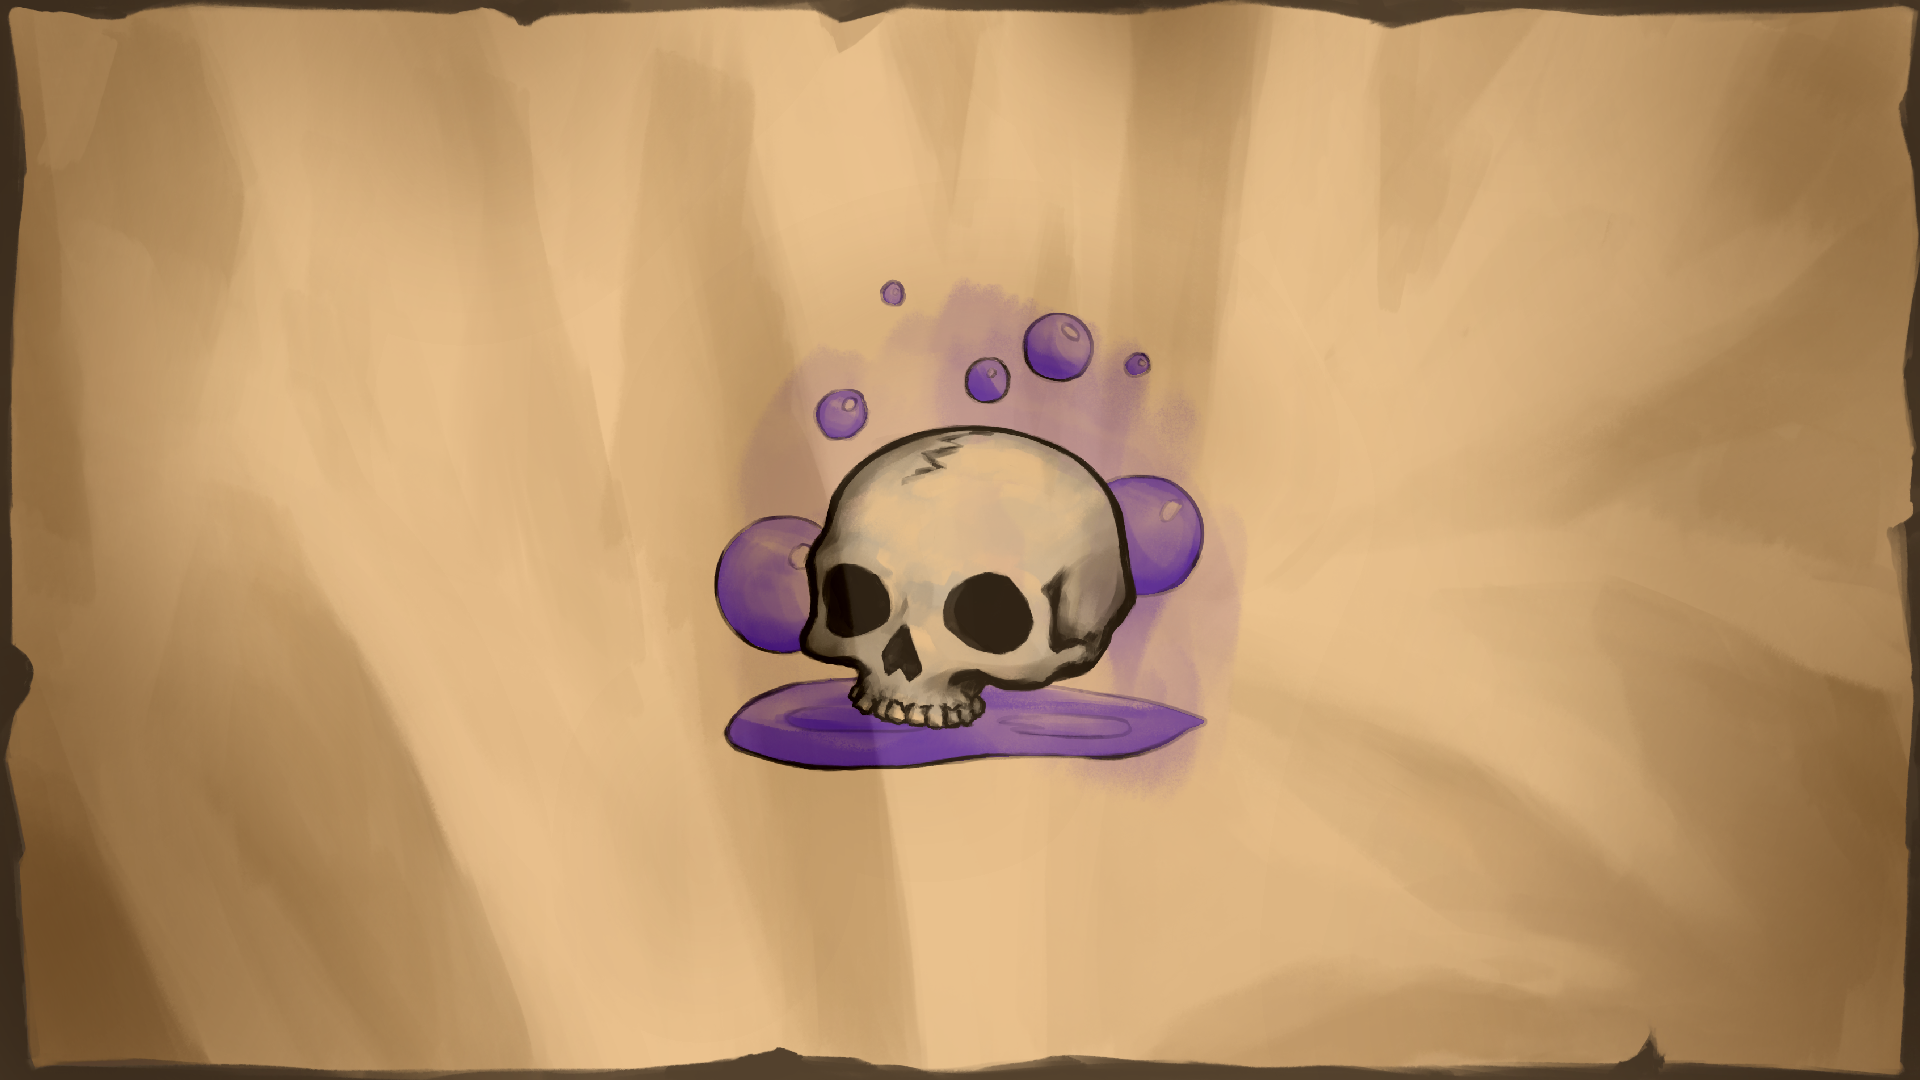 Icon for Death By Poison